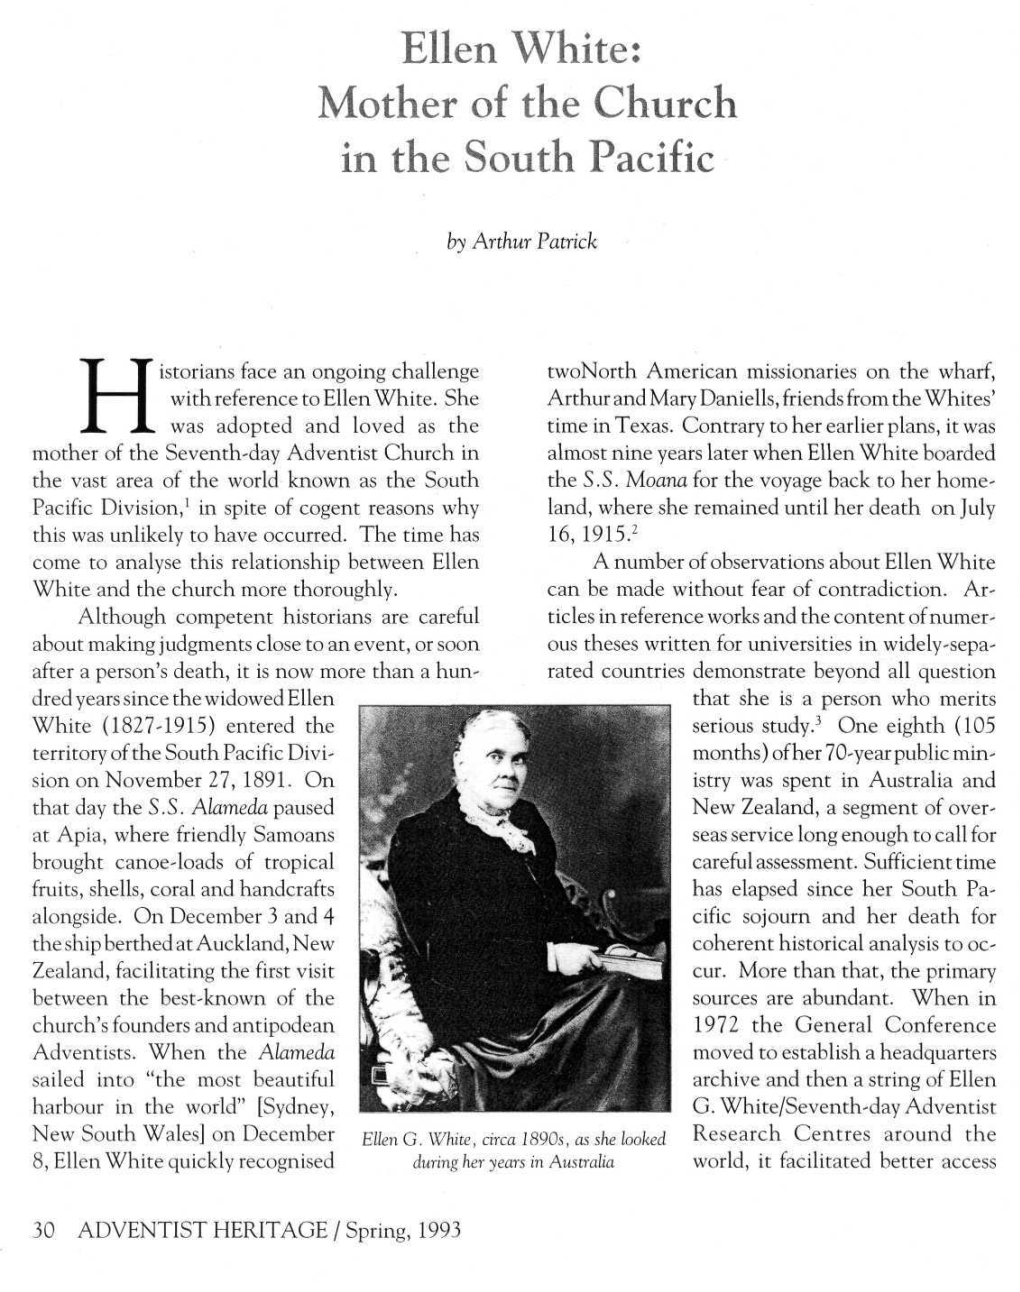 Ellen White: Mother of the Church in the South Pacific